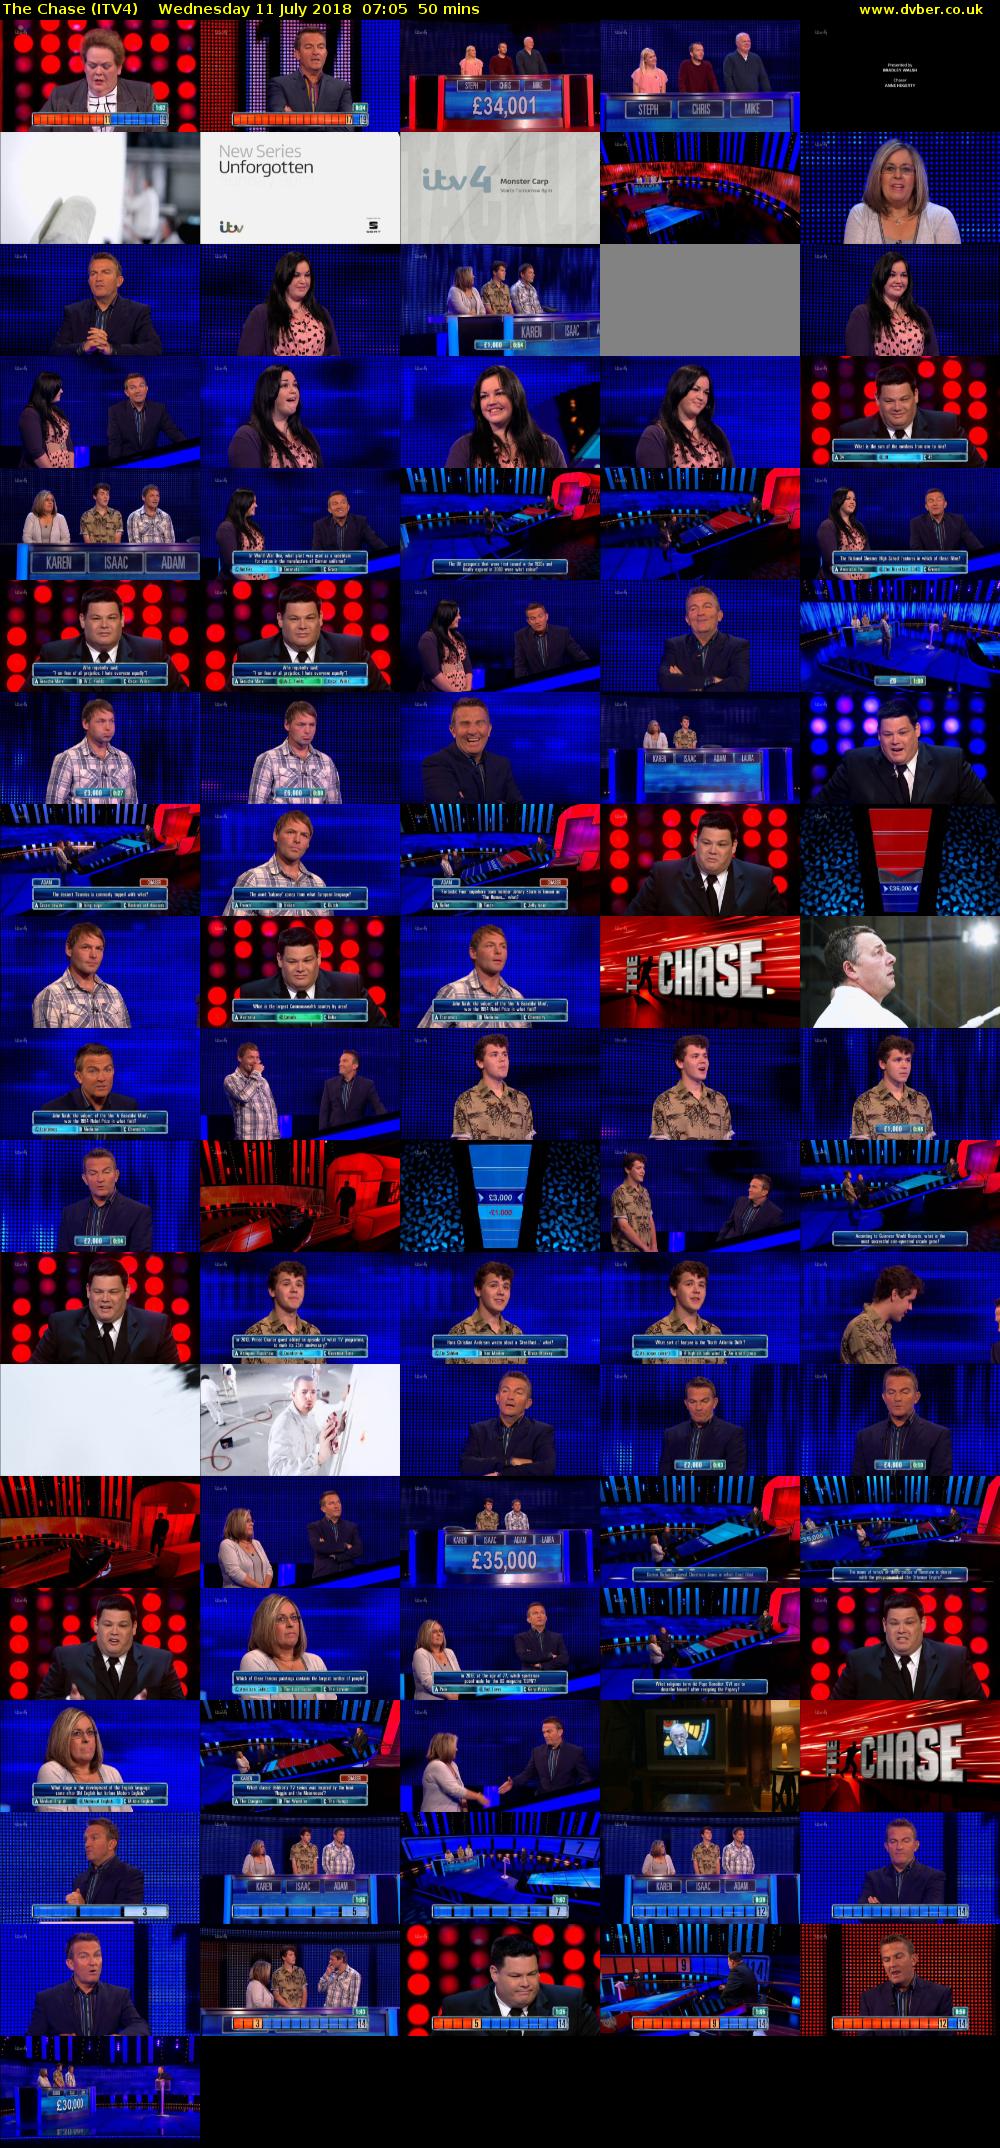 The Chase (ITV4) Wednesday 11 July 2018 07:05 - 07:55